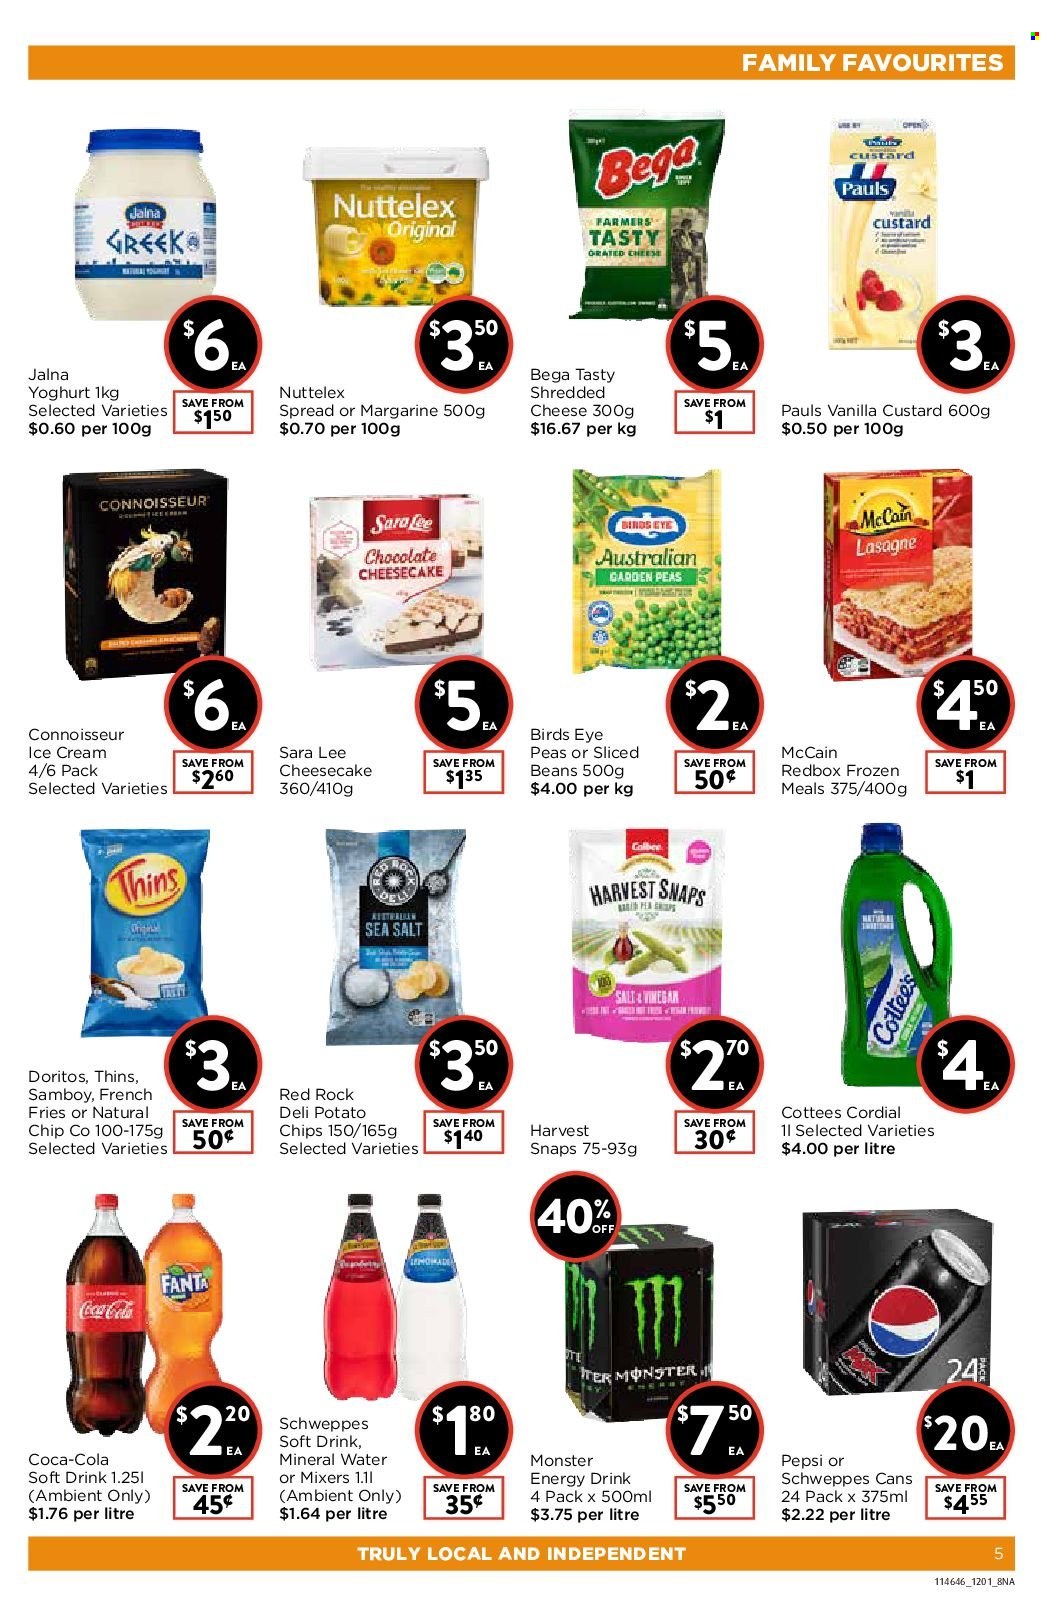 thumbnail - Foodworks Catalogue - 12 Jan 2022 - 18 Jan 2022 - Sales products - Sara Lee, beans, peas, Bird's Eye, shredded cheese, custard, yoghurt, margarine, ice cream, McCain, potato fries, french fries, Doritos, potato chips, Thins, Harvest Snaps, Coca-Cola, Schweppes, Pepsi, energy drink, Monster, Fanta, soft drink, Monster Energy, mineral water, TRULY. Page 5.